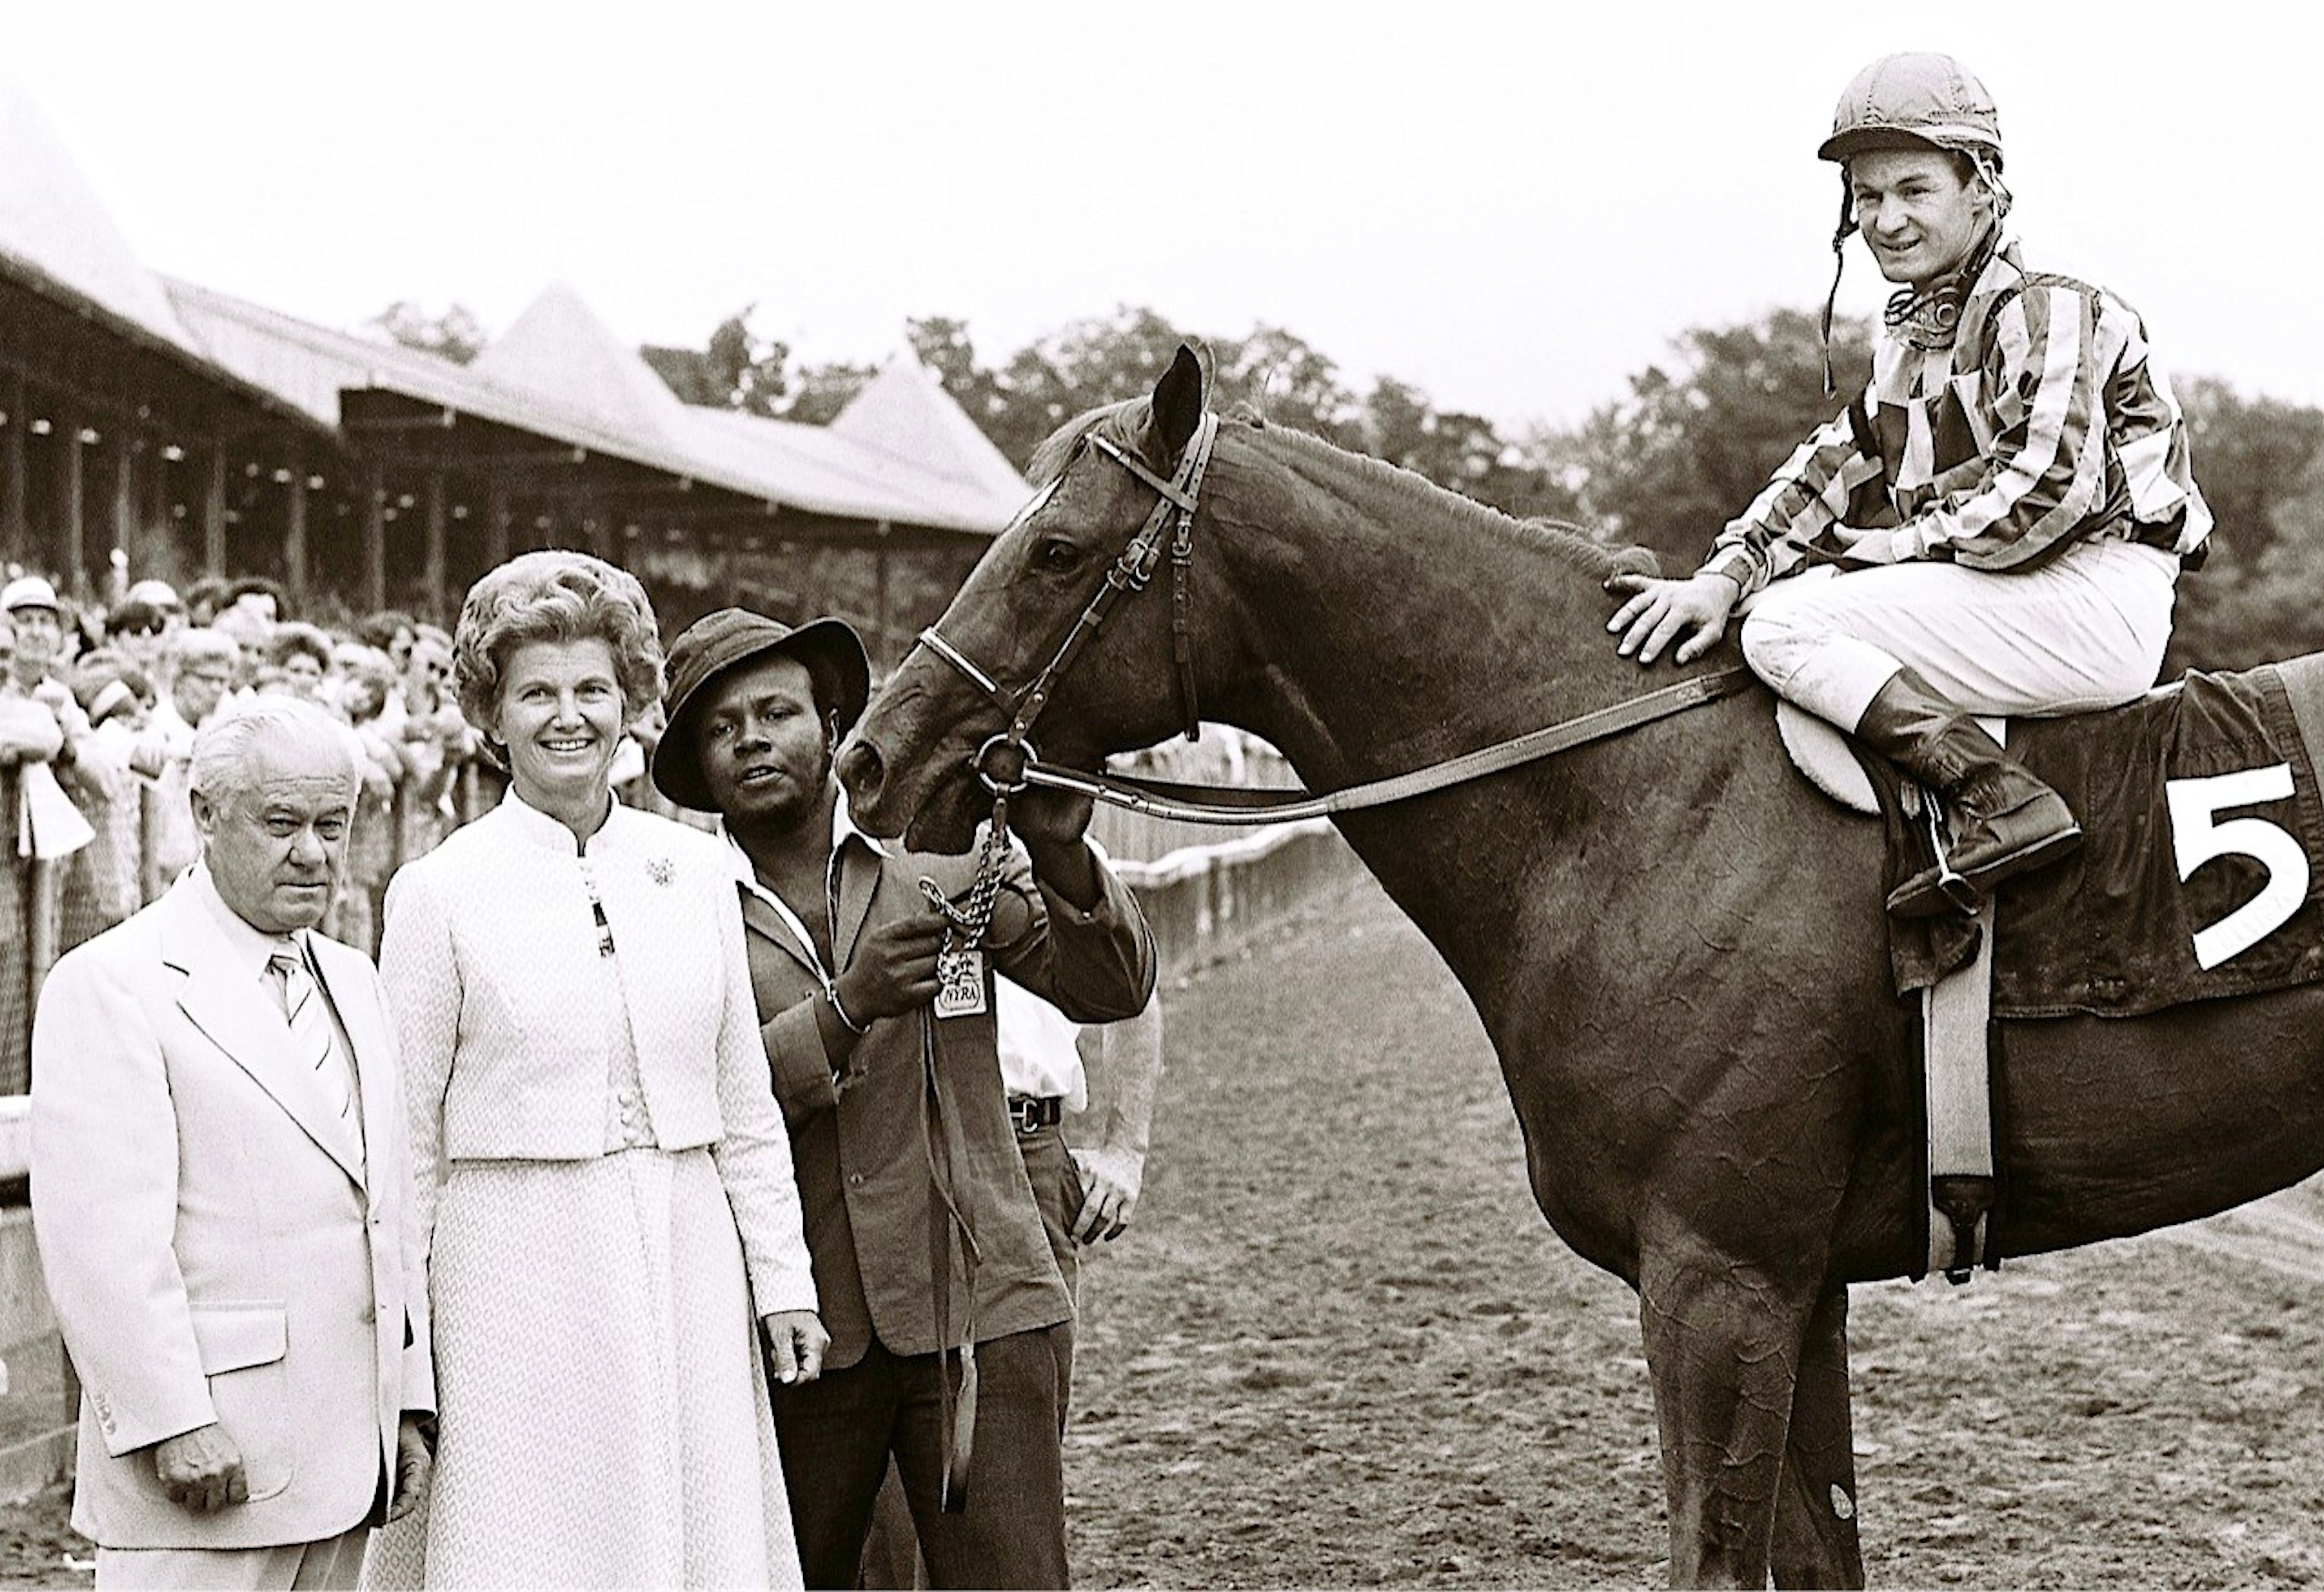 Ron Turcotte aboard Secretariat after winning the 1972 Sanford Stakes at Saratoga with, from left, Lucien Laurin, Penny Chenery, and Eddie Sweat (Douglas Lees)